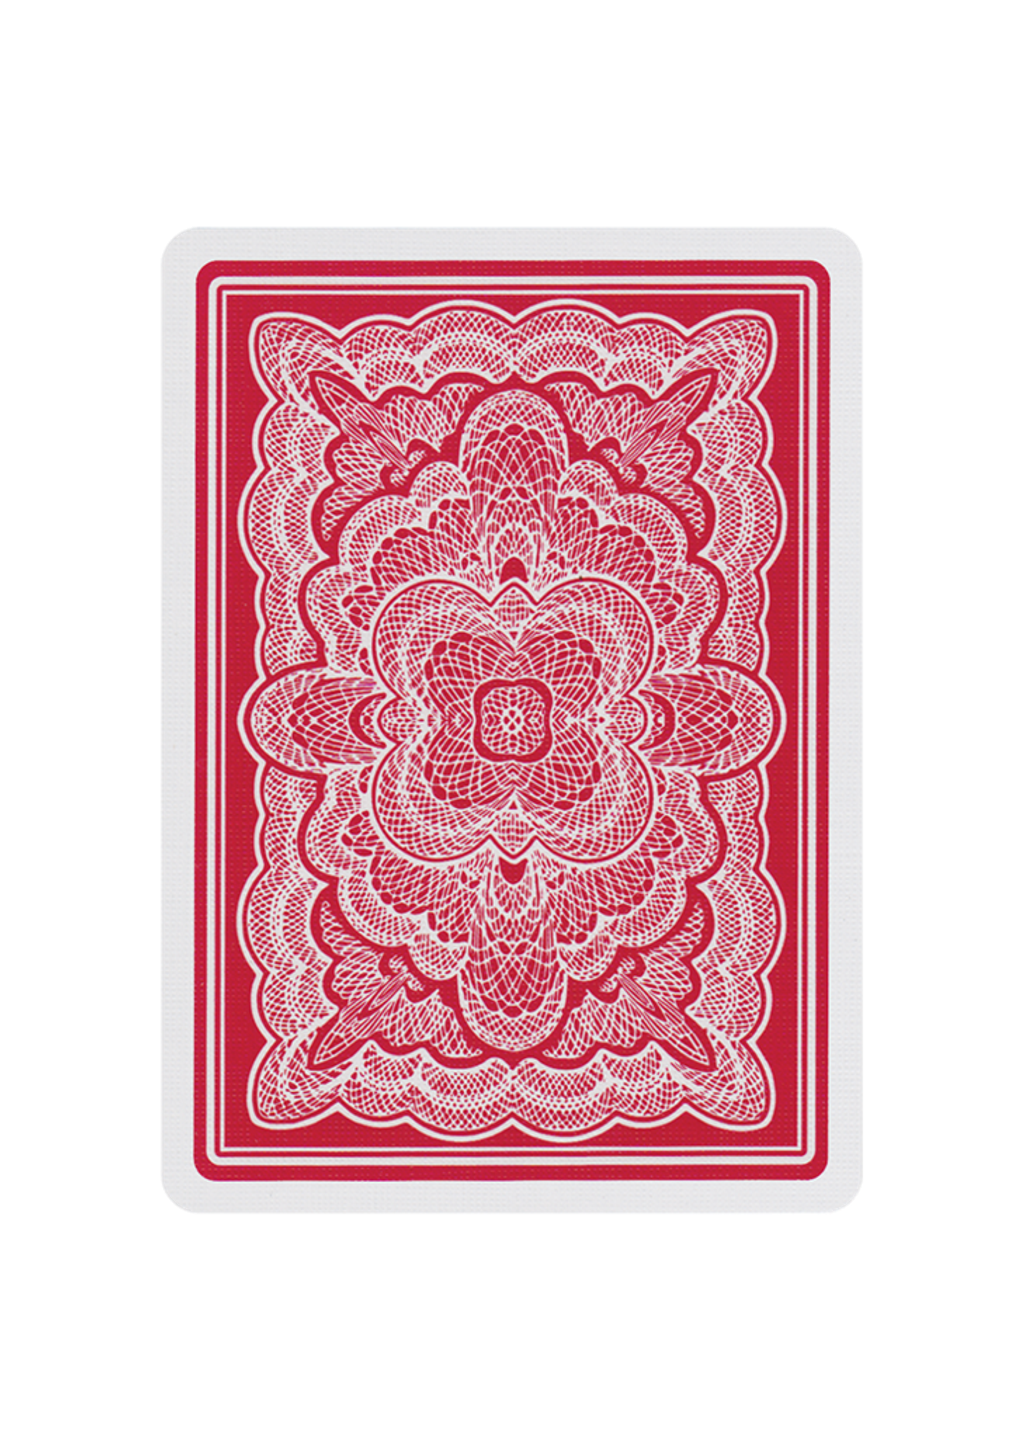 0007_blue-ribbon-playing-cards_0000_red_1024x1024.png